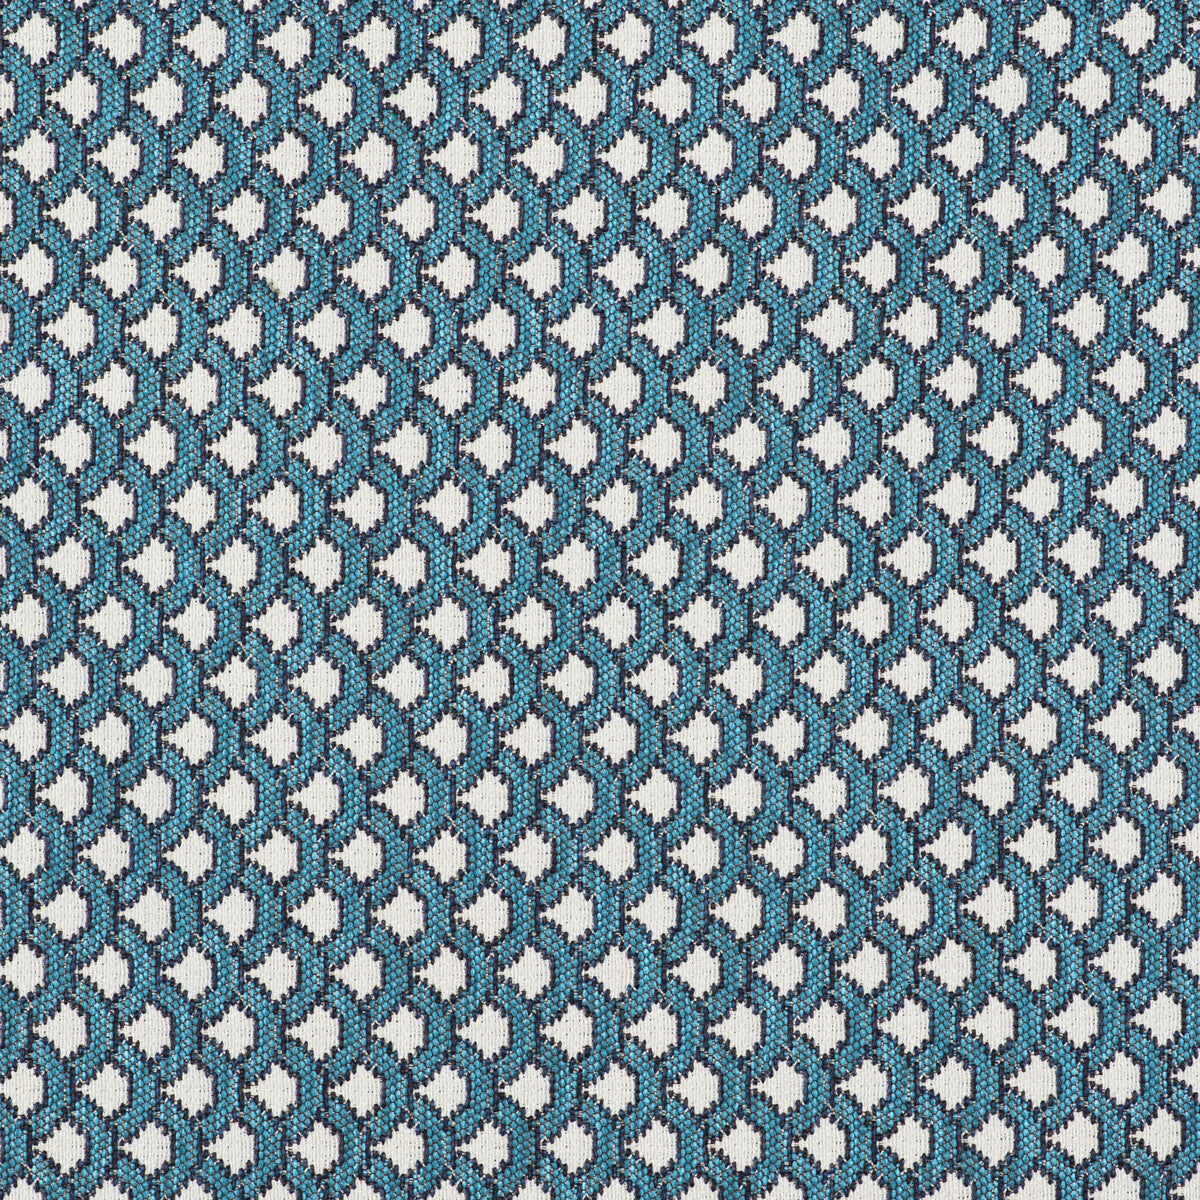 Ondas fabric in azul color - pattern GDT5511.002.0 - by Gaston y Daniela in the Gaston Libreria collection